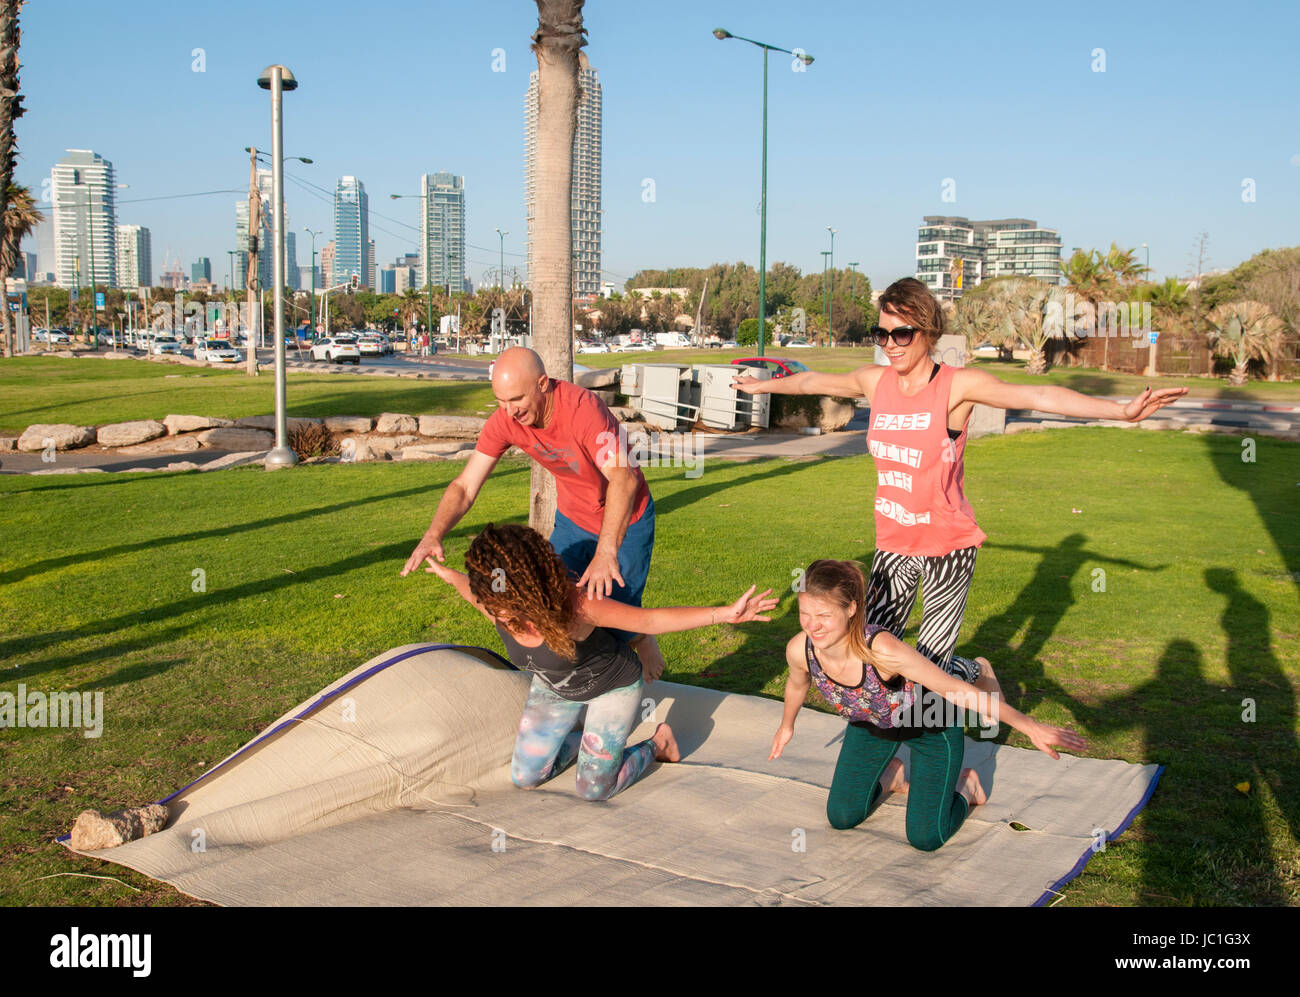 Acro Yoga practice session in Charles Clore Park on the Jaffa shore, Israel Stock Photo